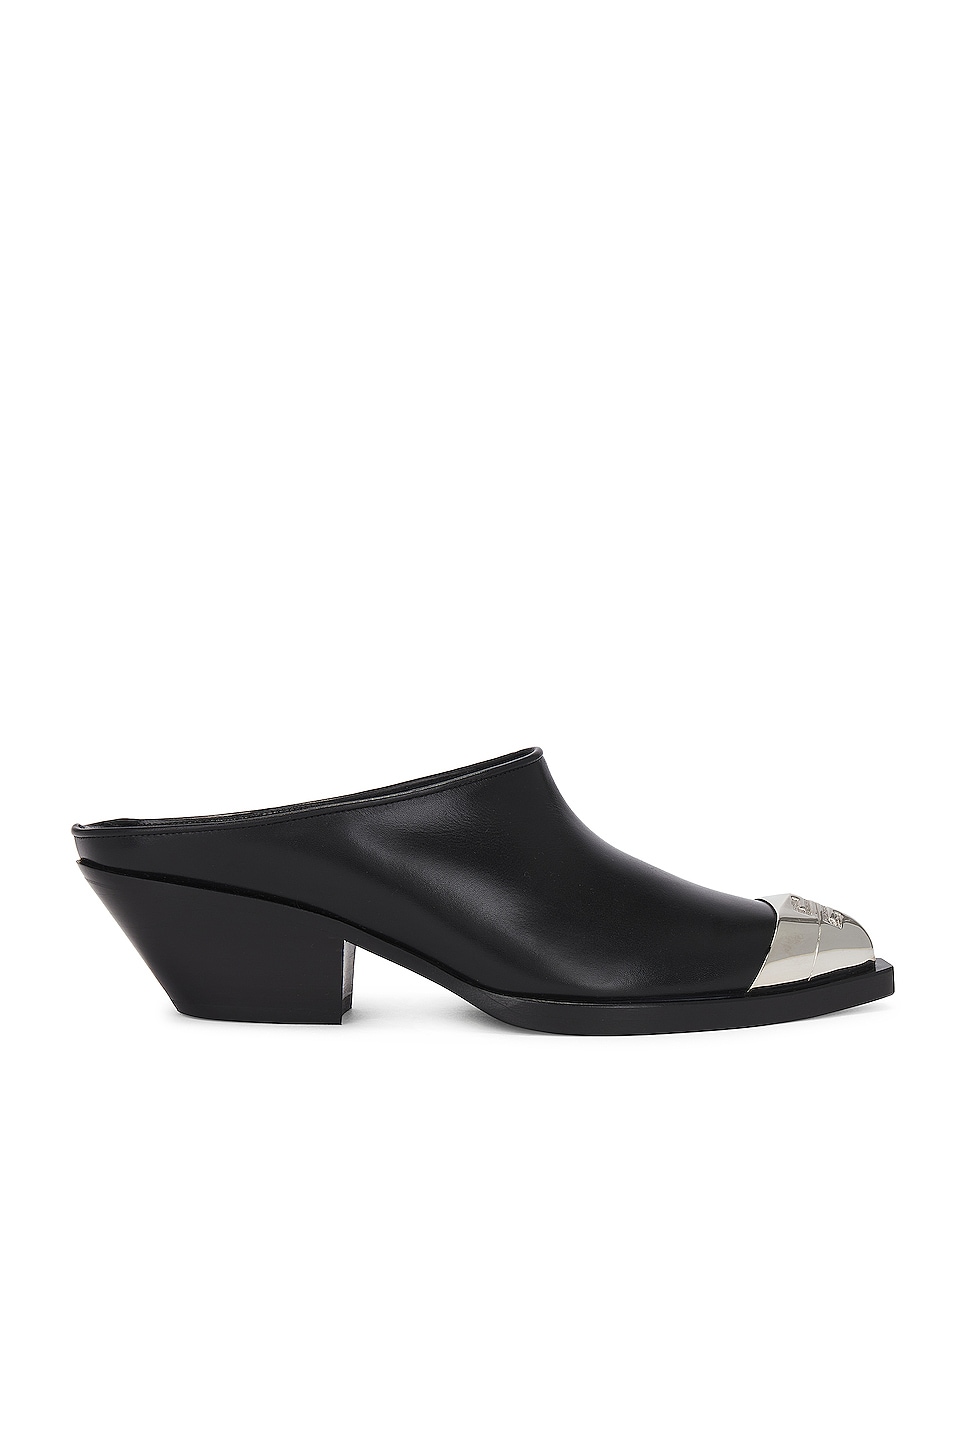 Image 1 of Givenchy Western Mule in Black